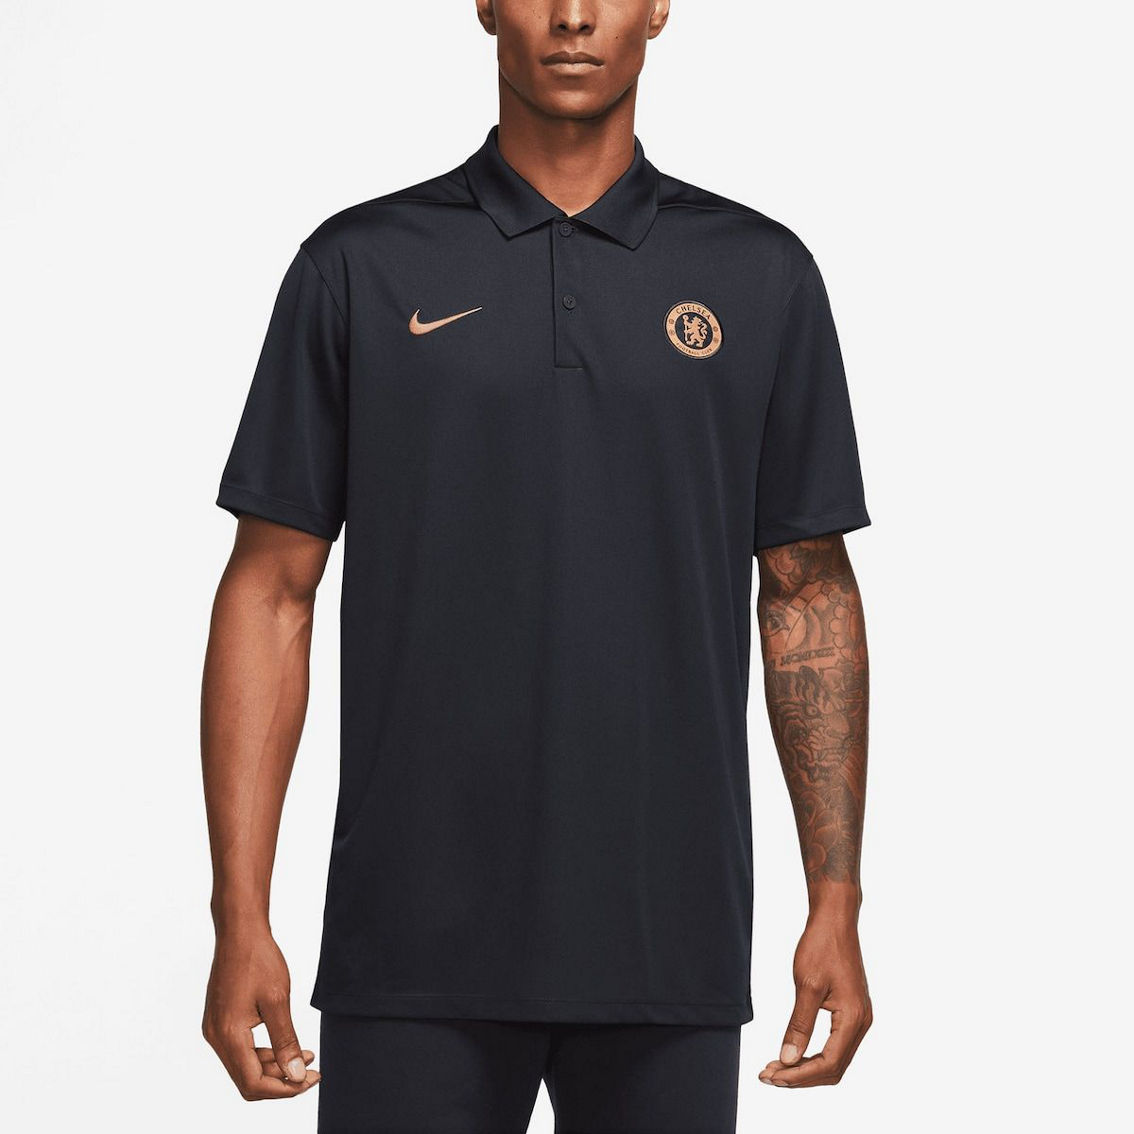 Nike Men's Navy Chelsea Victory Performance Polo - Image 2 of 4